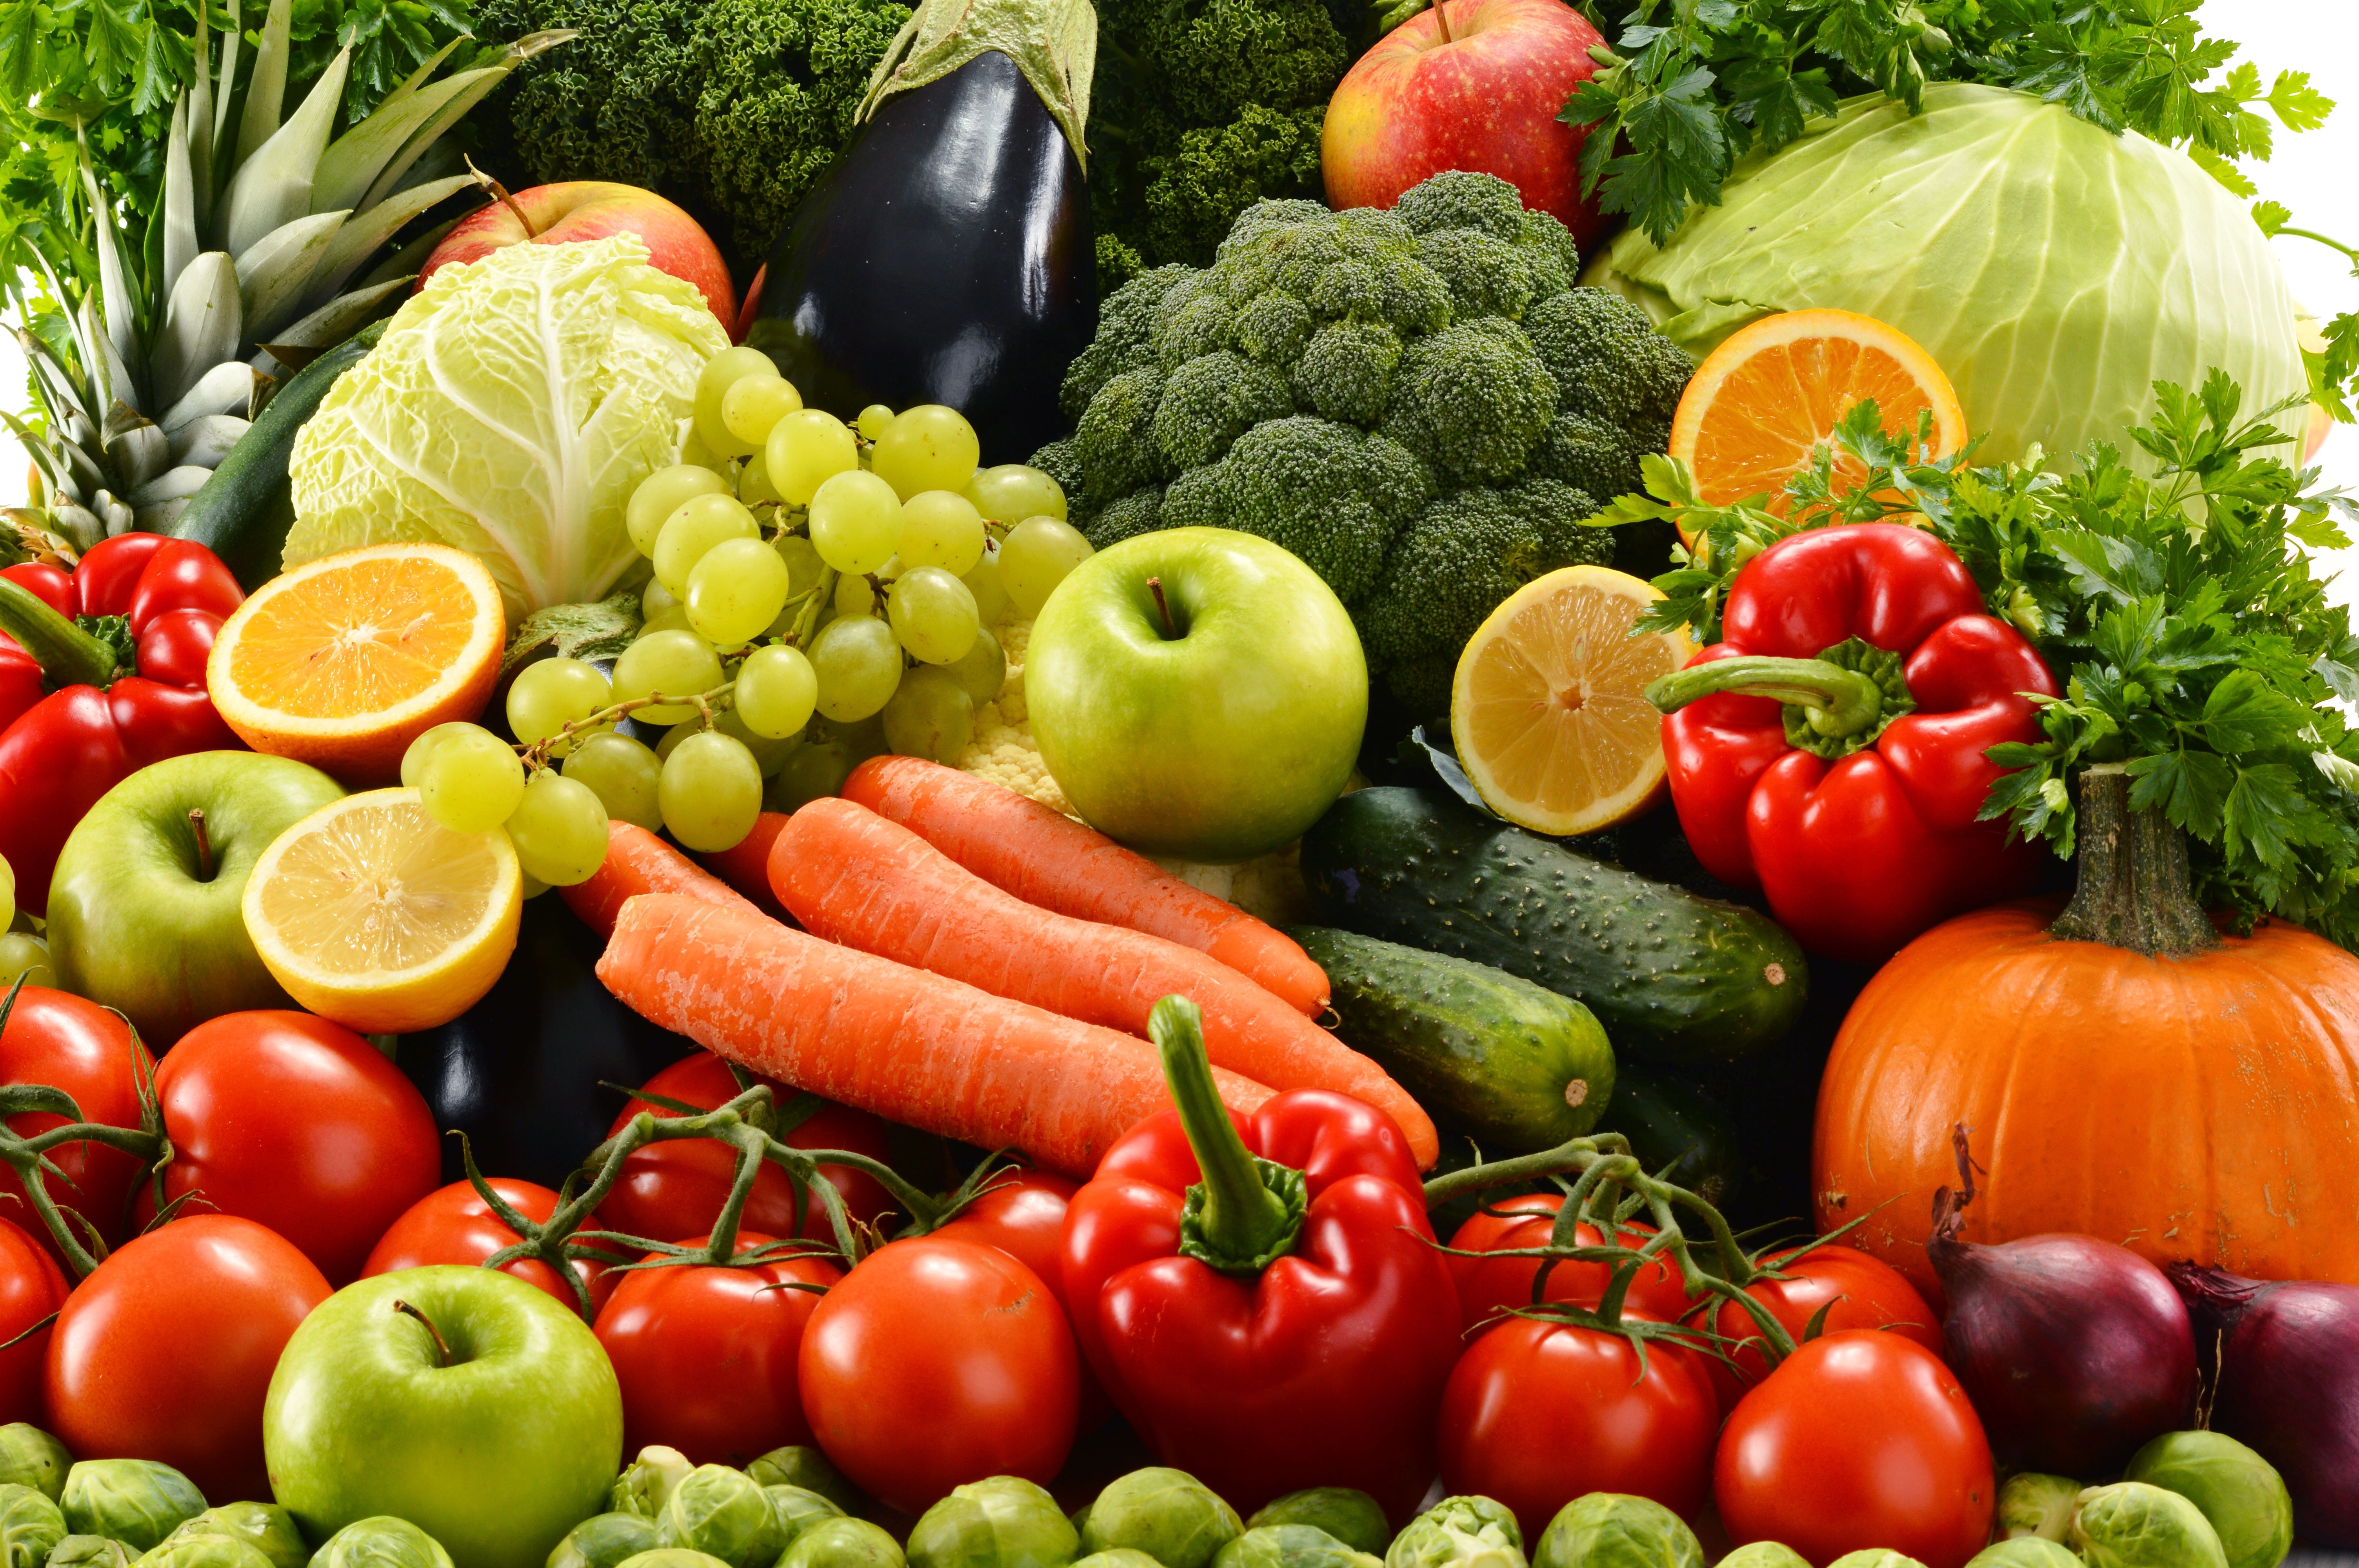 fresh fruits and vegetables wallpaper